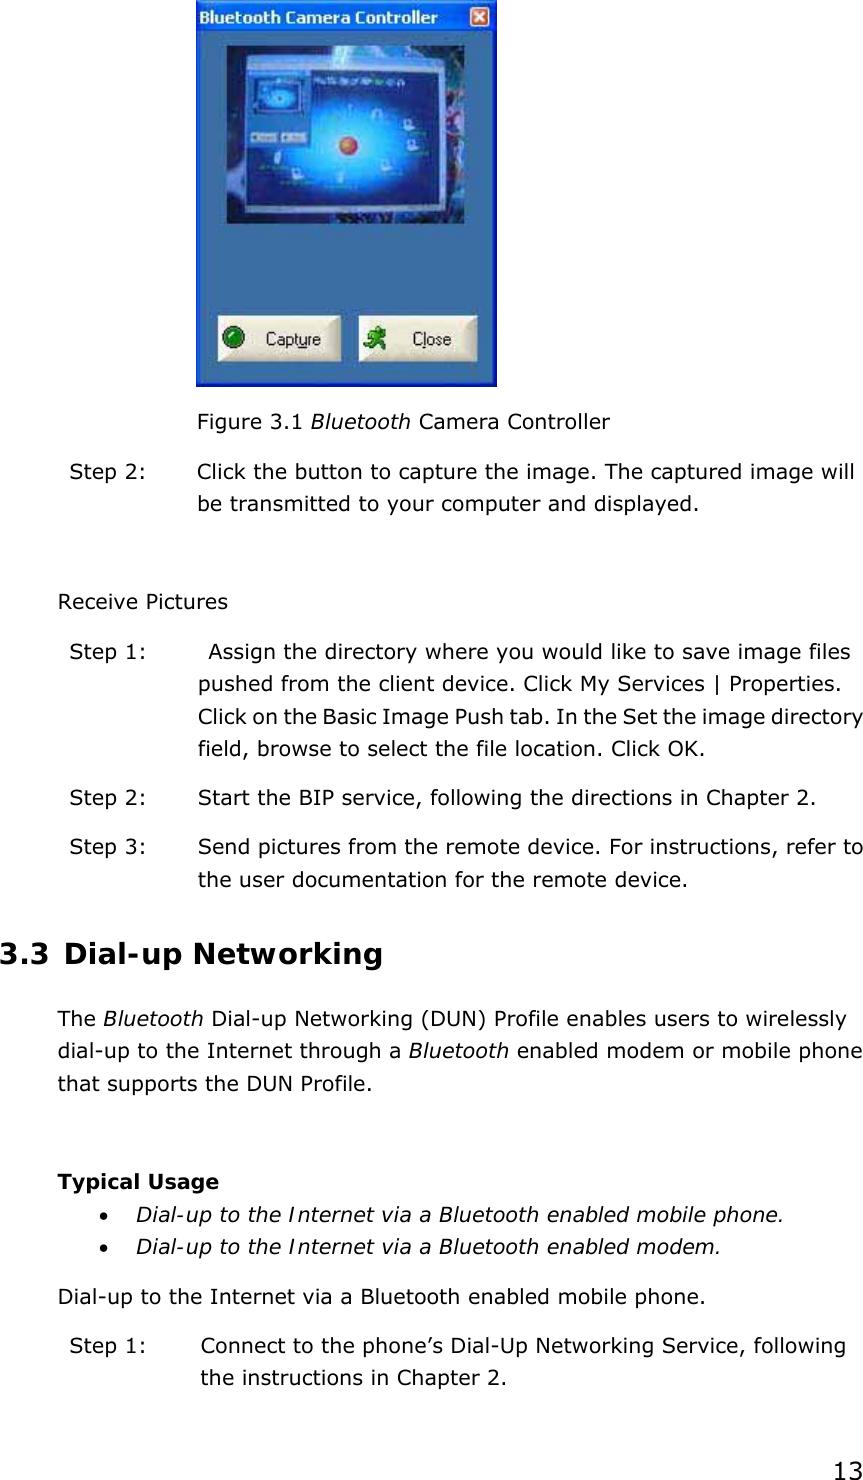 13  Figure 3.1 Bluetooth Camera Controller Step 2:  Click the button to capture the image. The captured image will be transmitted to your computer and displayed.  Receive Pictures Step 1:    Assign the directory where you would like to save image files pushed from the client device. Click My Services | Properties. Click on the Basic Image Push tab. In the Set the image directory field, browse to select the file location. Click OK. Step 2:  Start the BIP service, following the directions in Chapter 2. Step 3:  Send pictures from the remote device. For instructions, refer to the user documentation for the remote device. 3.3 Dial-up Networking The Bluetooth Dial-up Networking (DUN) Profile enables users to wirelessly dial-up to the Internet through a Bluetooth enabled modem or mobile phone that supports the DUN Profile.  Typical Usage • Dial-up to the Internet via a Bluetooth enabled mobile phone. • Dial-up to the Internet via a Bluetooth enabled modem. Dial-up to the Internet via a Bluetooth enabled mobile phone. Step 1:  Connect to the phone’s Dial-Up Networking Service, following the instructions in Chapter 2. 